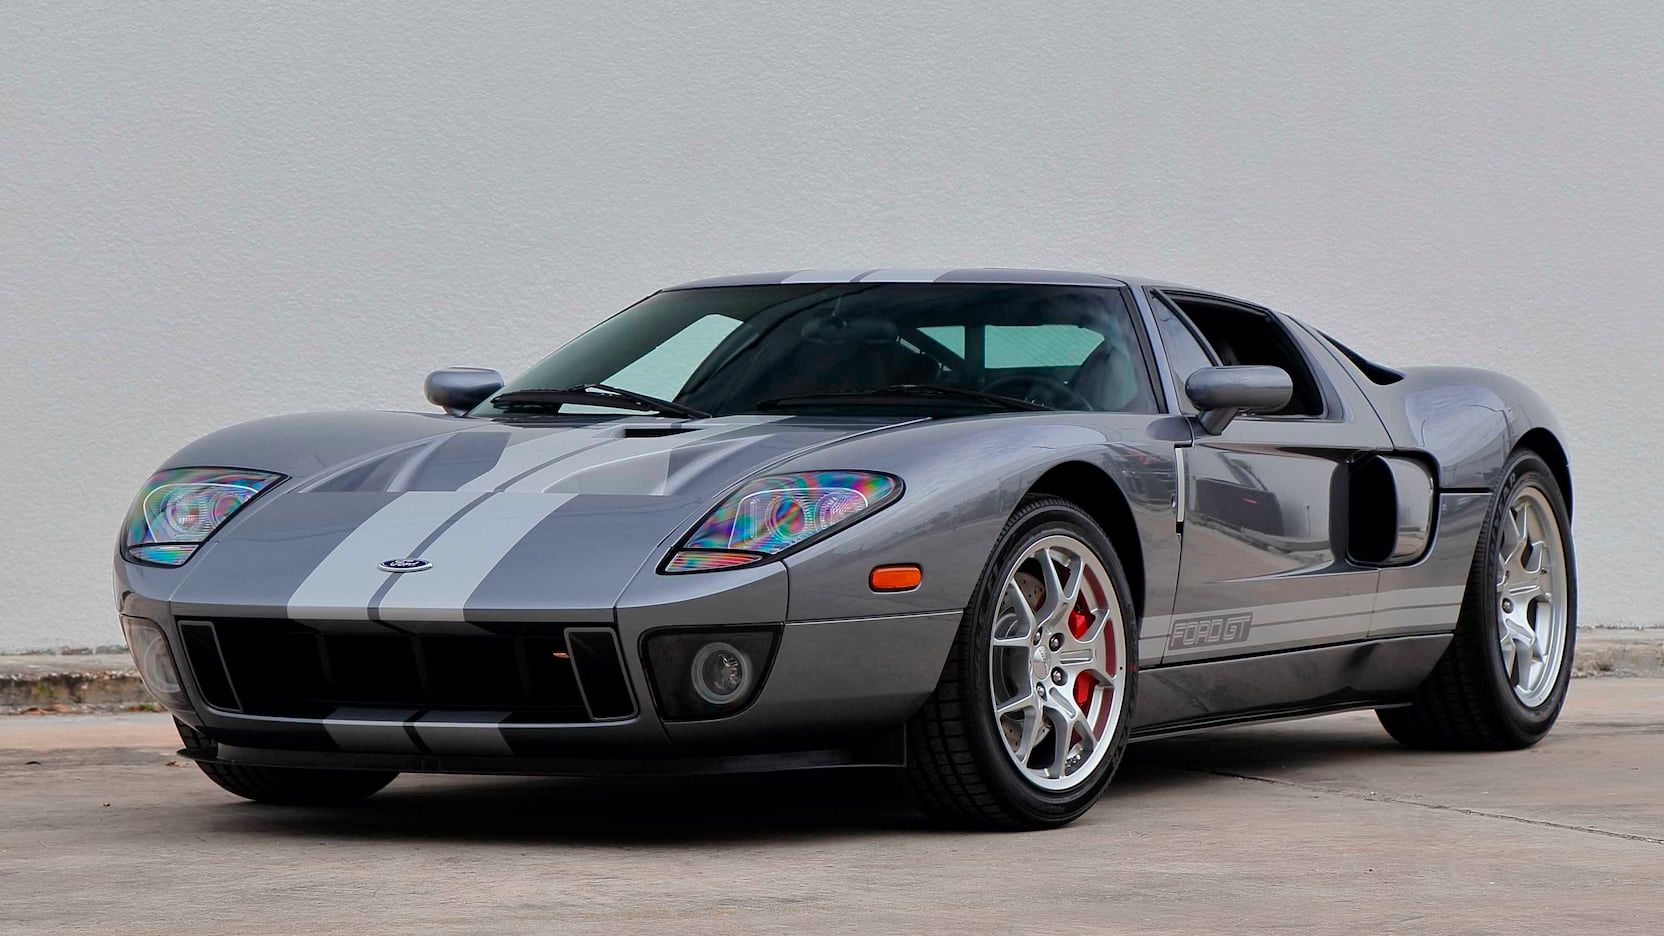 Gray Ford GT from 2006